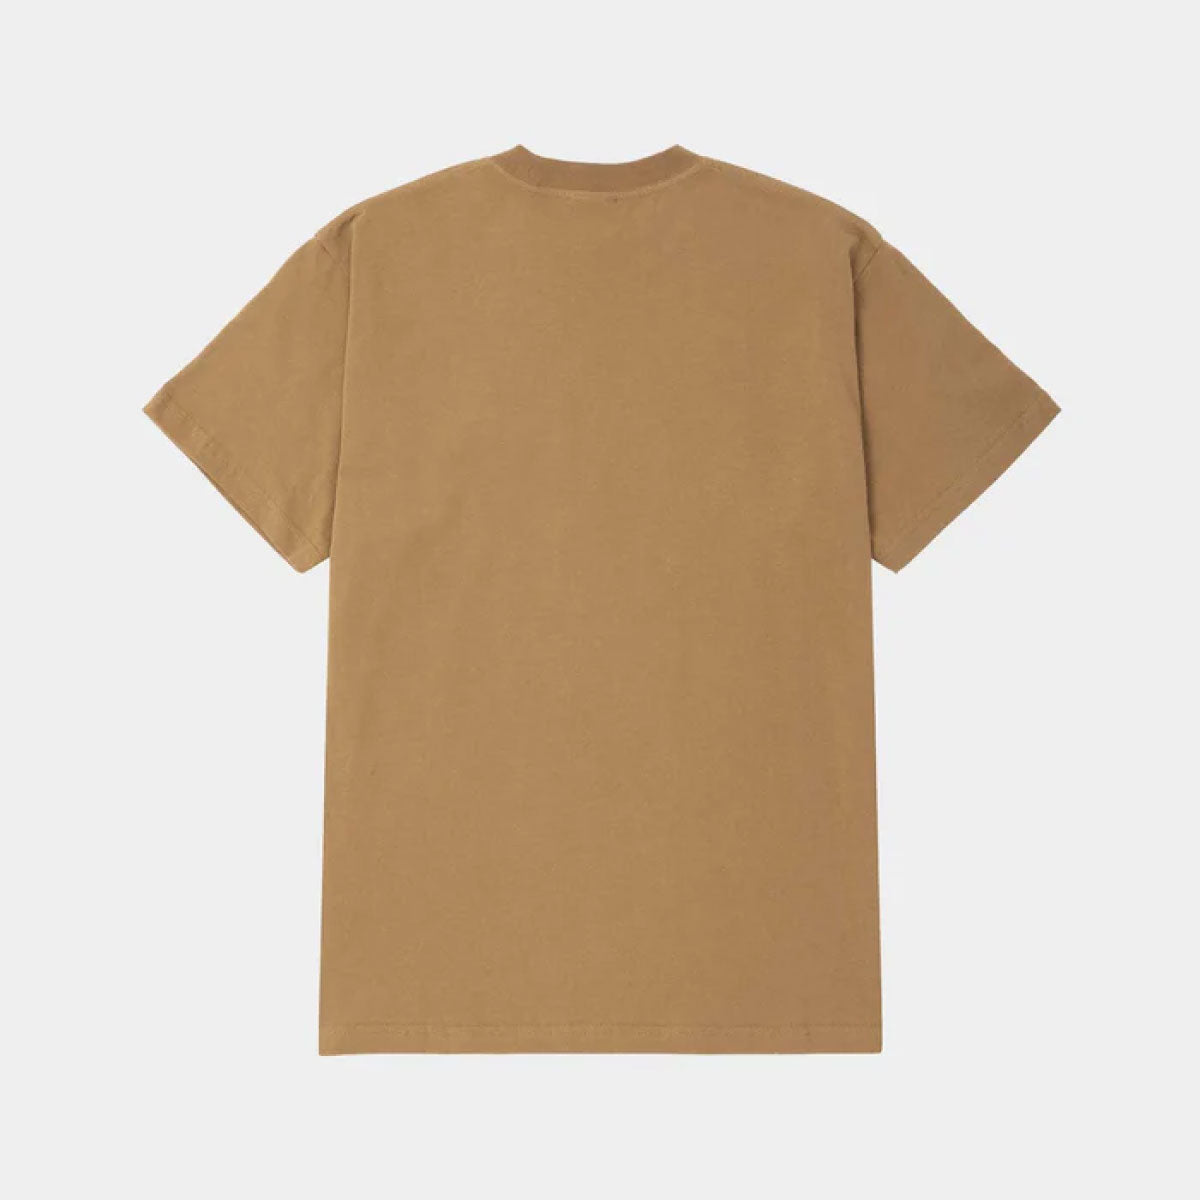 Upside Downtown S/s Tee Camel